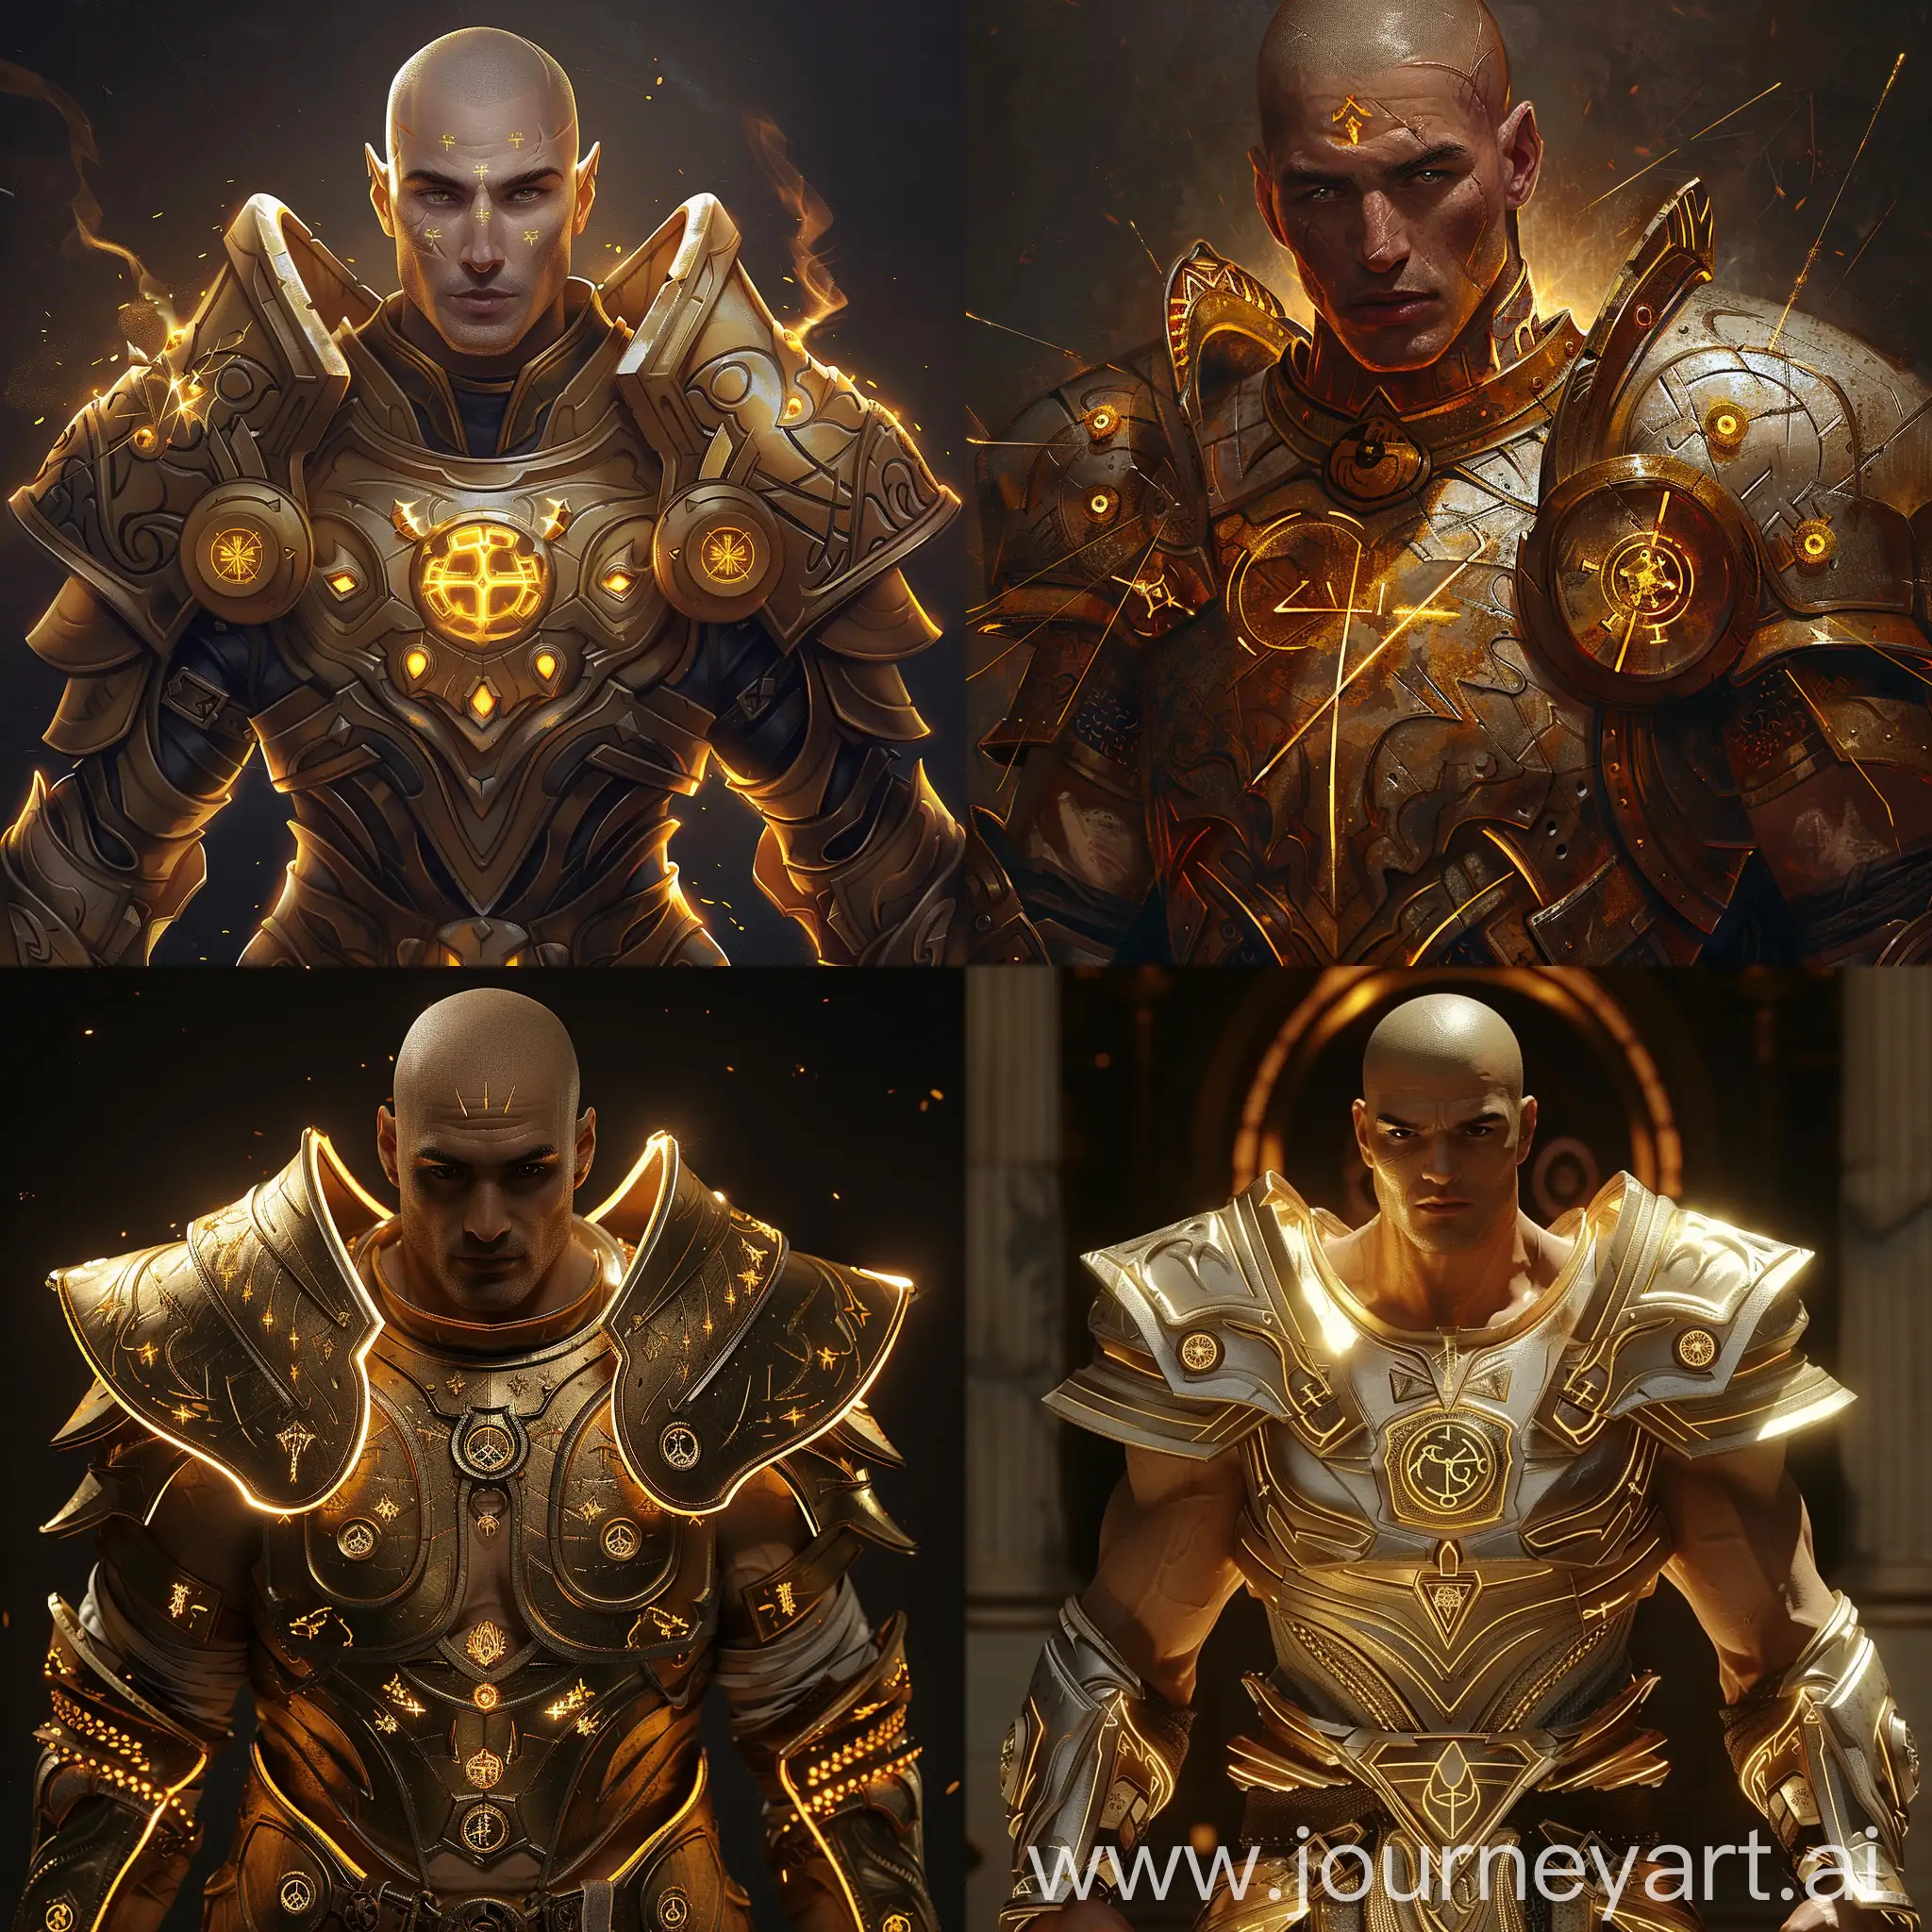 Golden-Paladin-with-Engraved-Armor-in-Radiant-Sunlight